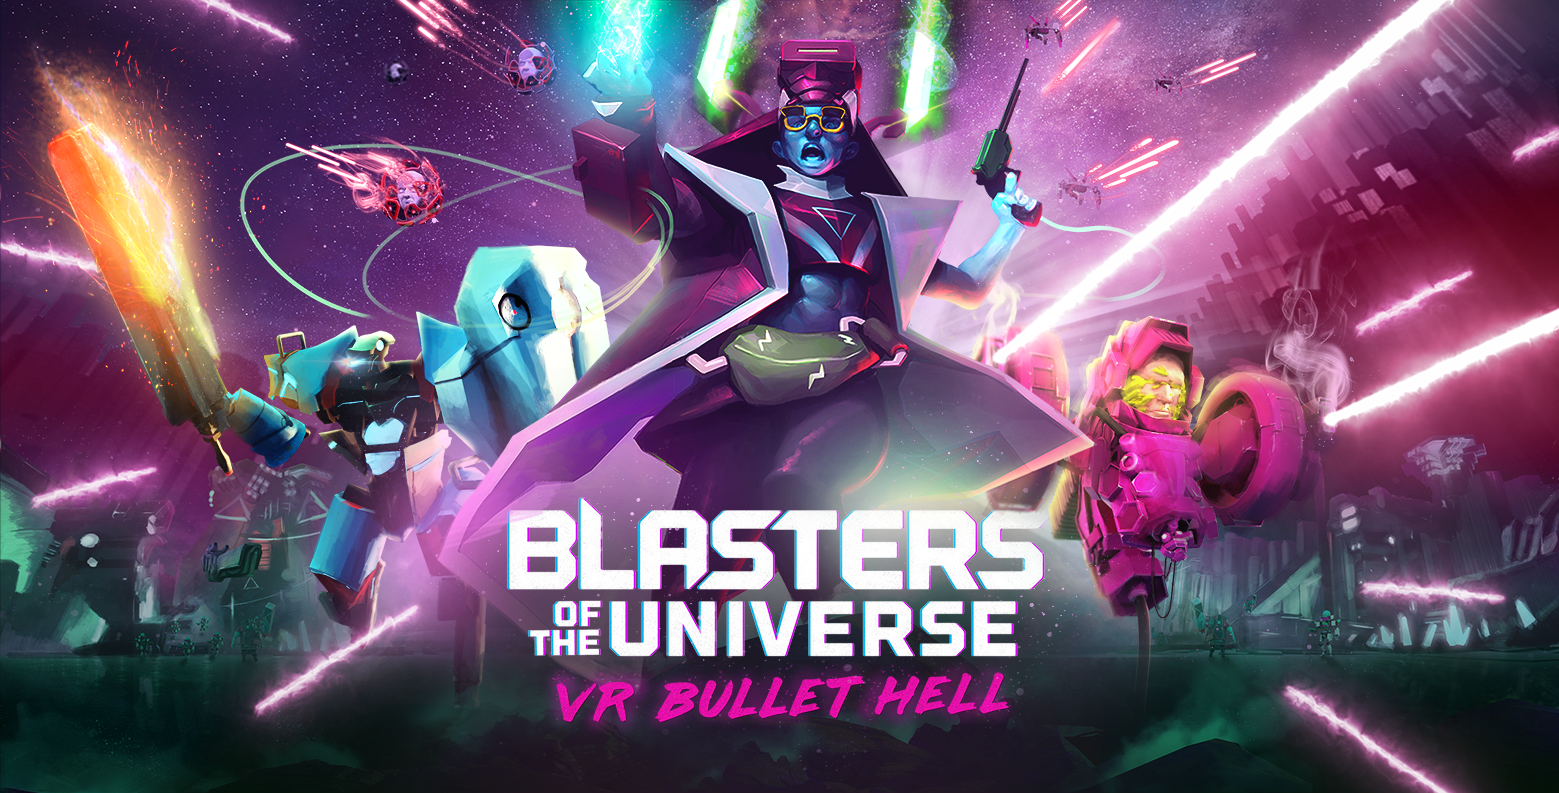 Blasters of the Universe VR Bullet Hell